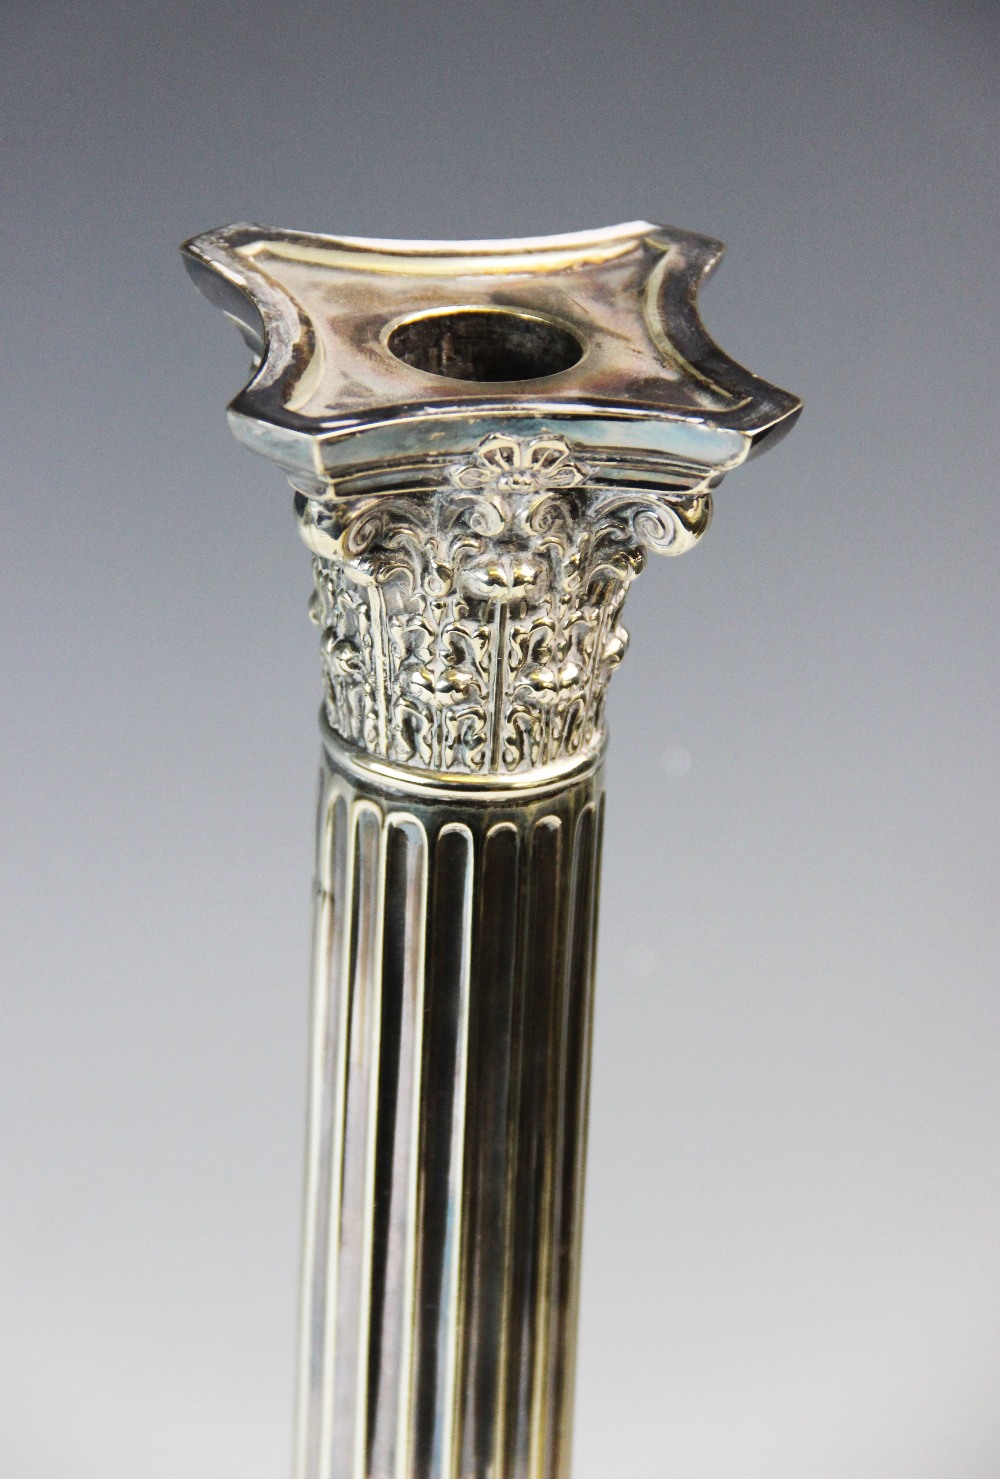 An early 20th century silver plated candlestick, designed as a Corinthian capital, atop a stop- - Bild 3 aus 3